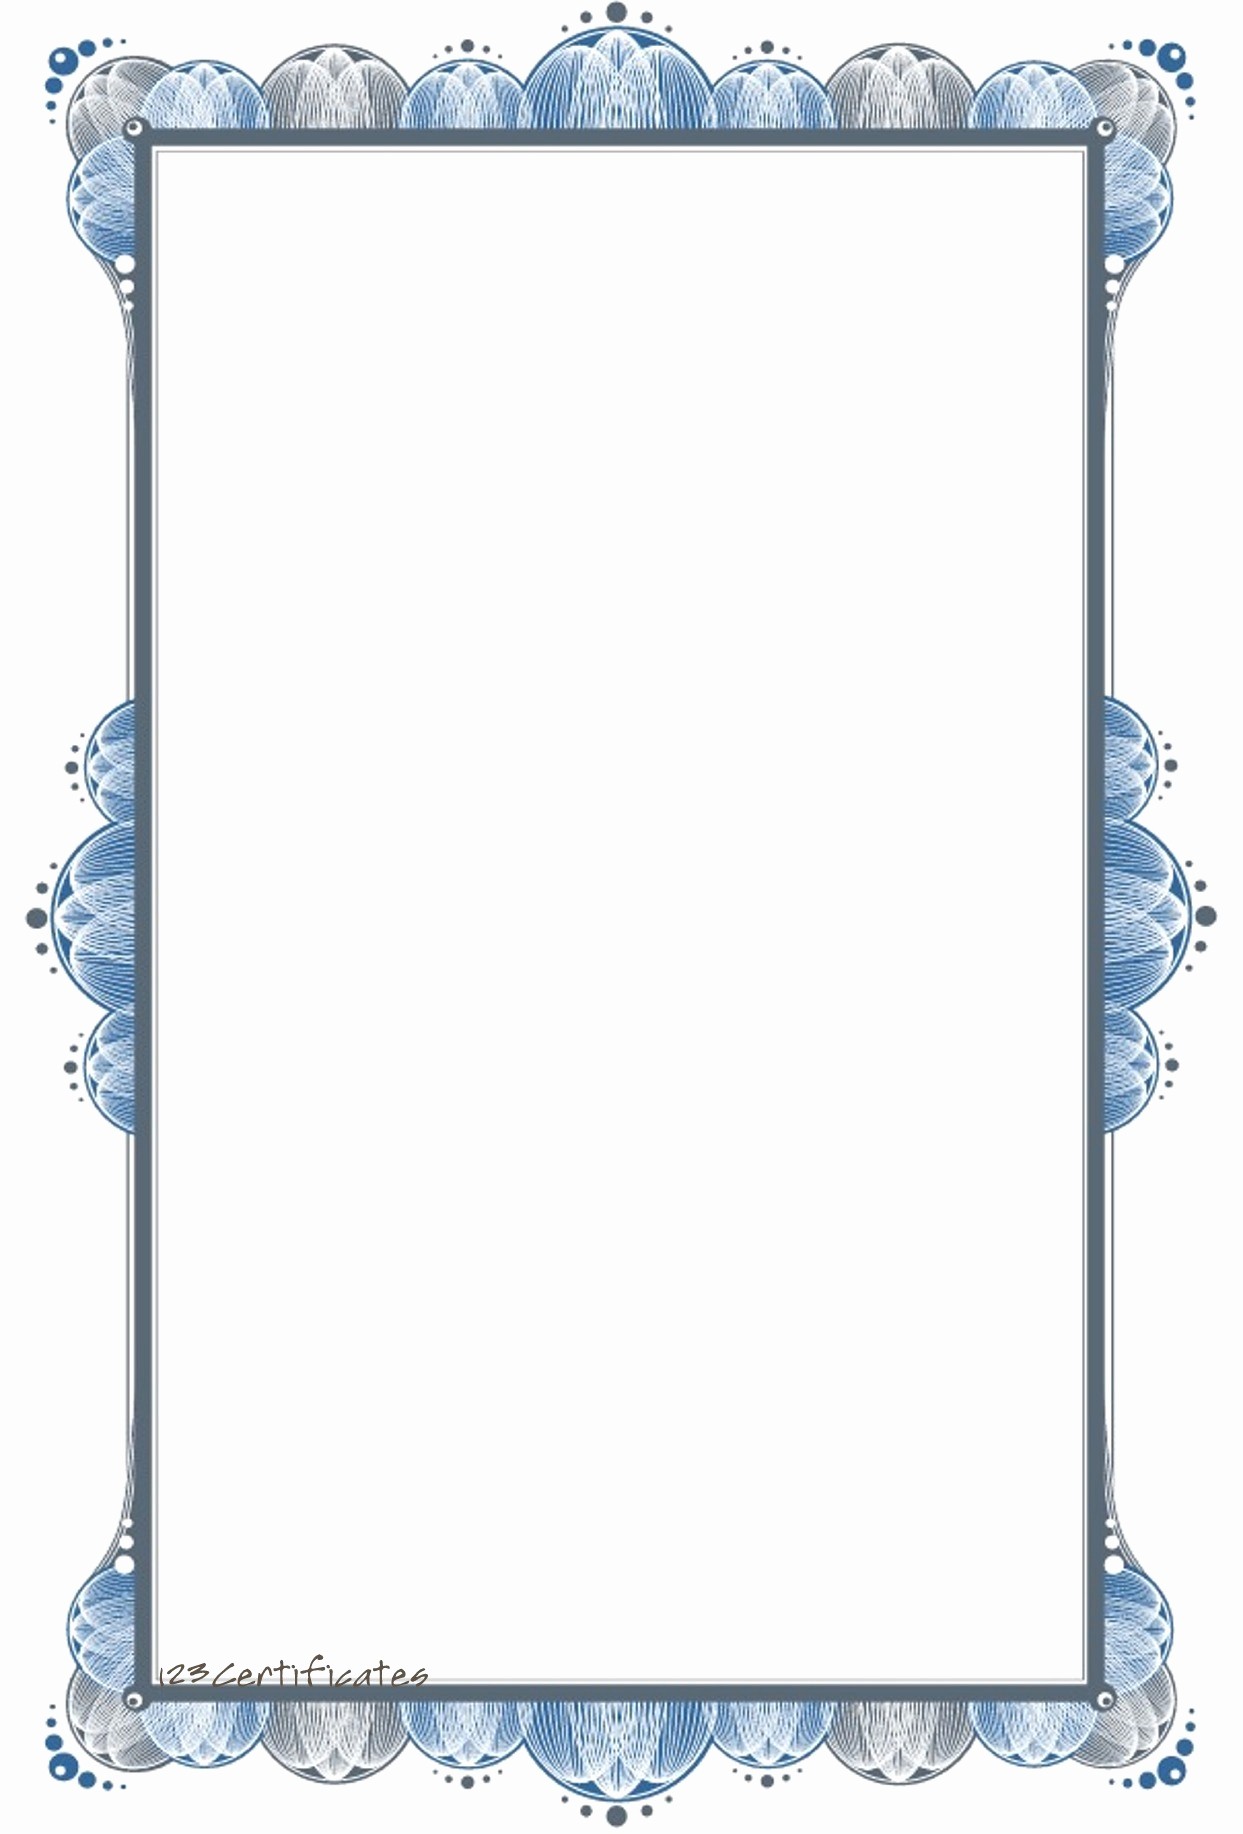 Free Printable Blank Certificate Borders Best Of Professional Border Templates